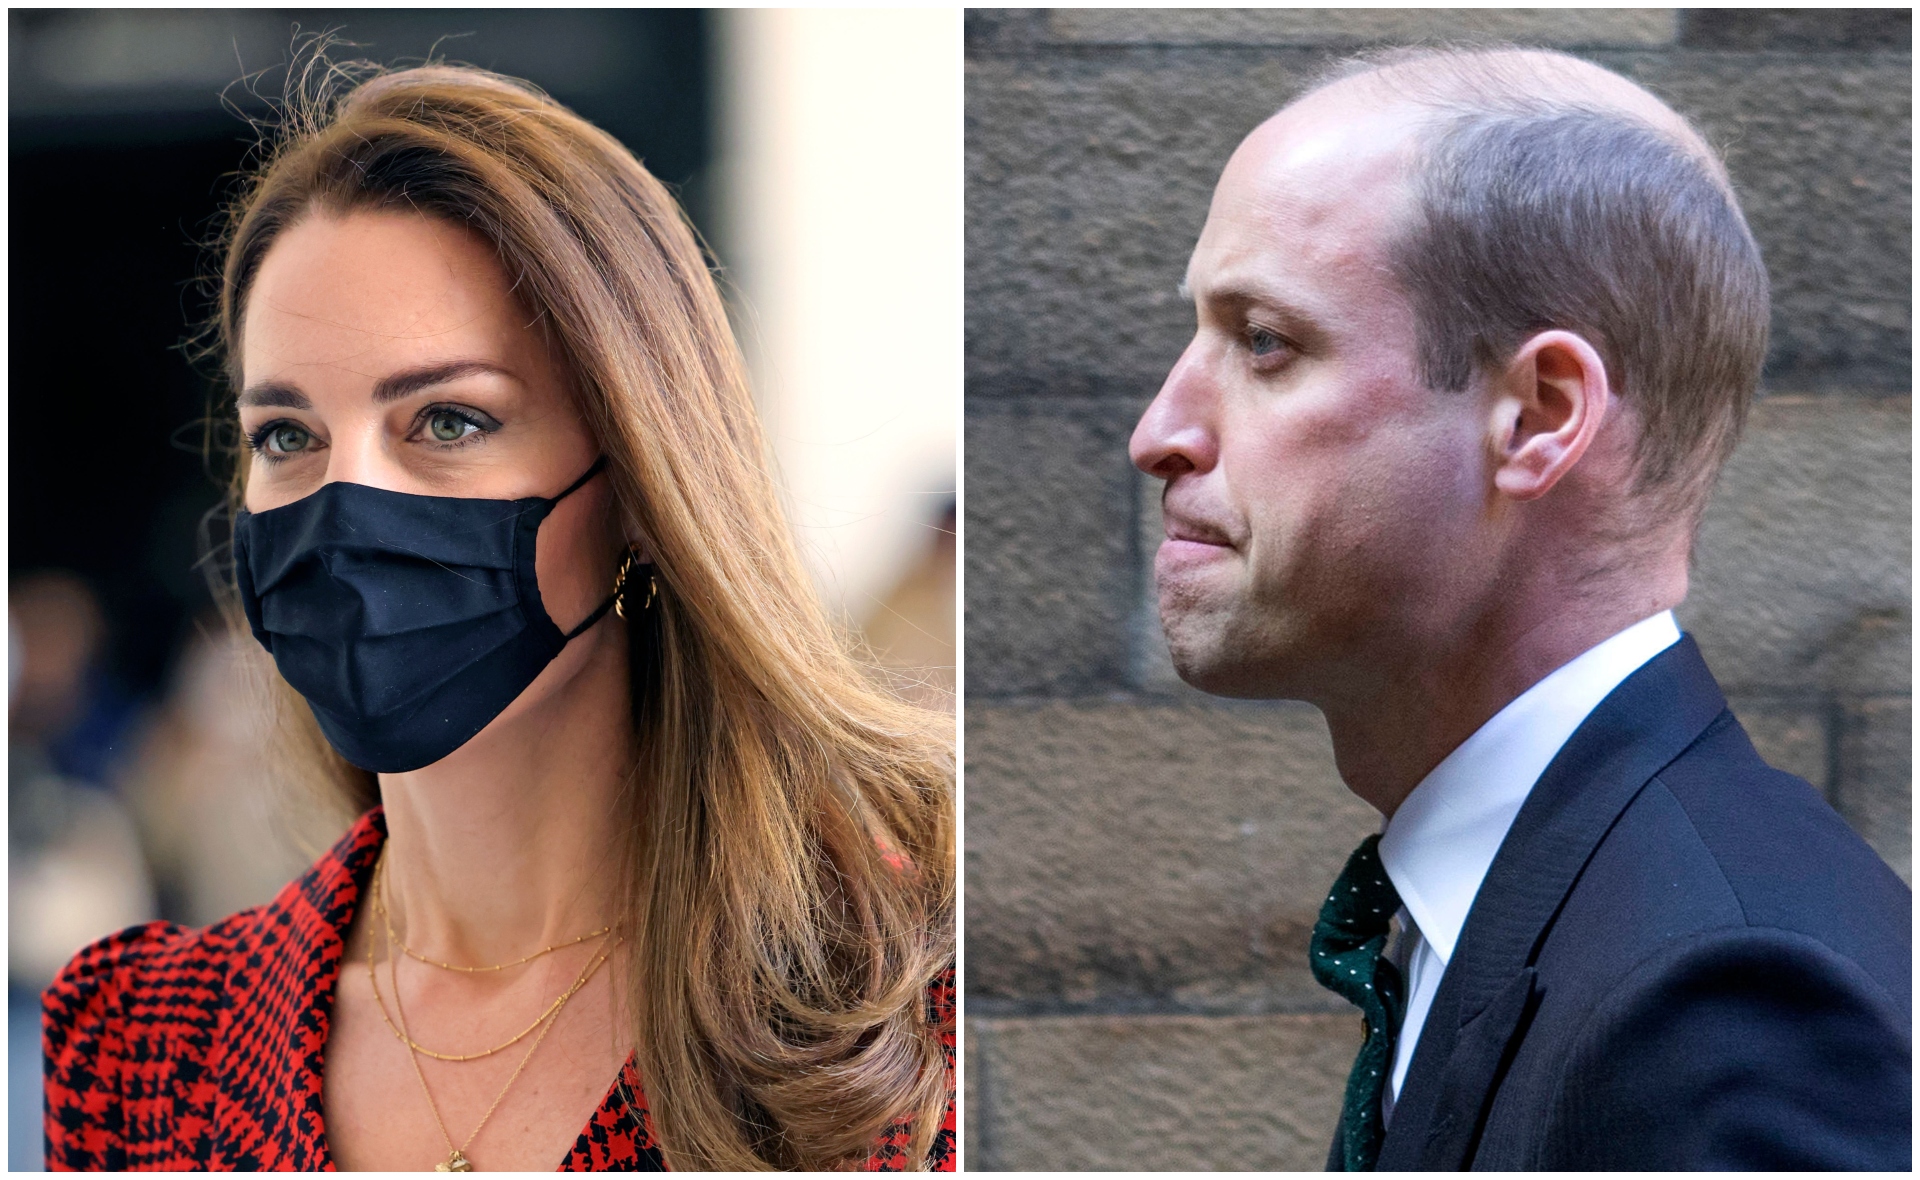 Prince William awaits Duchess Catherine’s arrival after an emotional weekend in Scotland